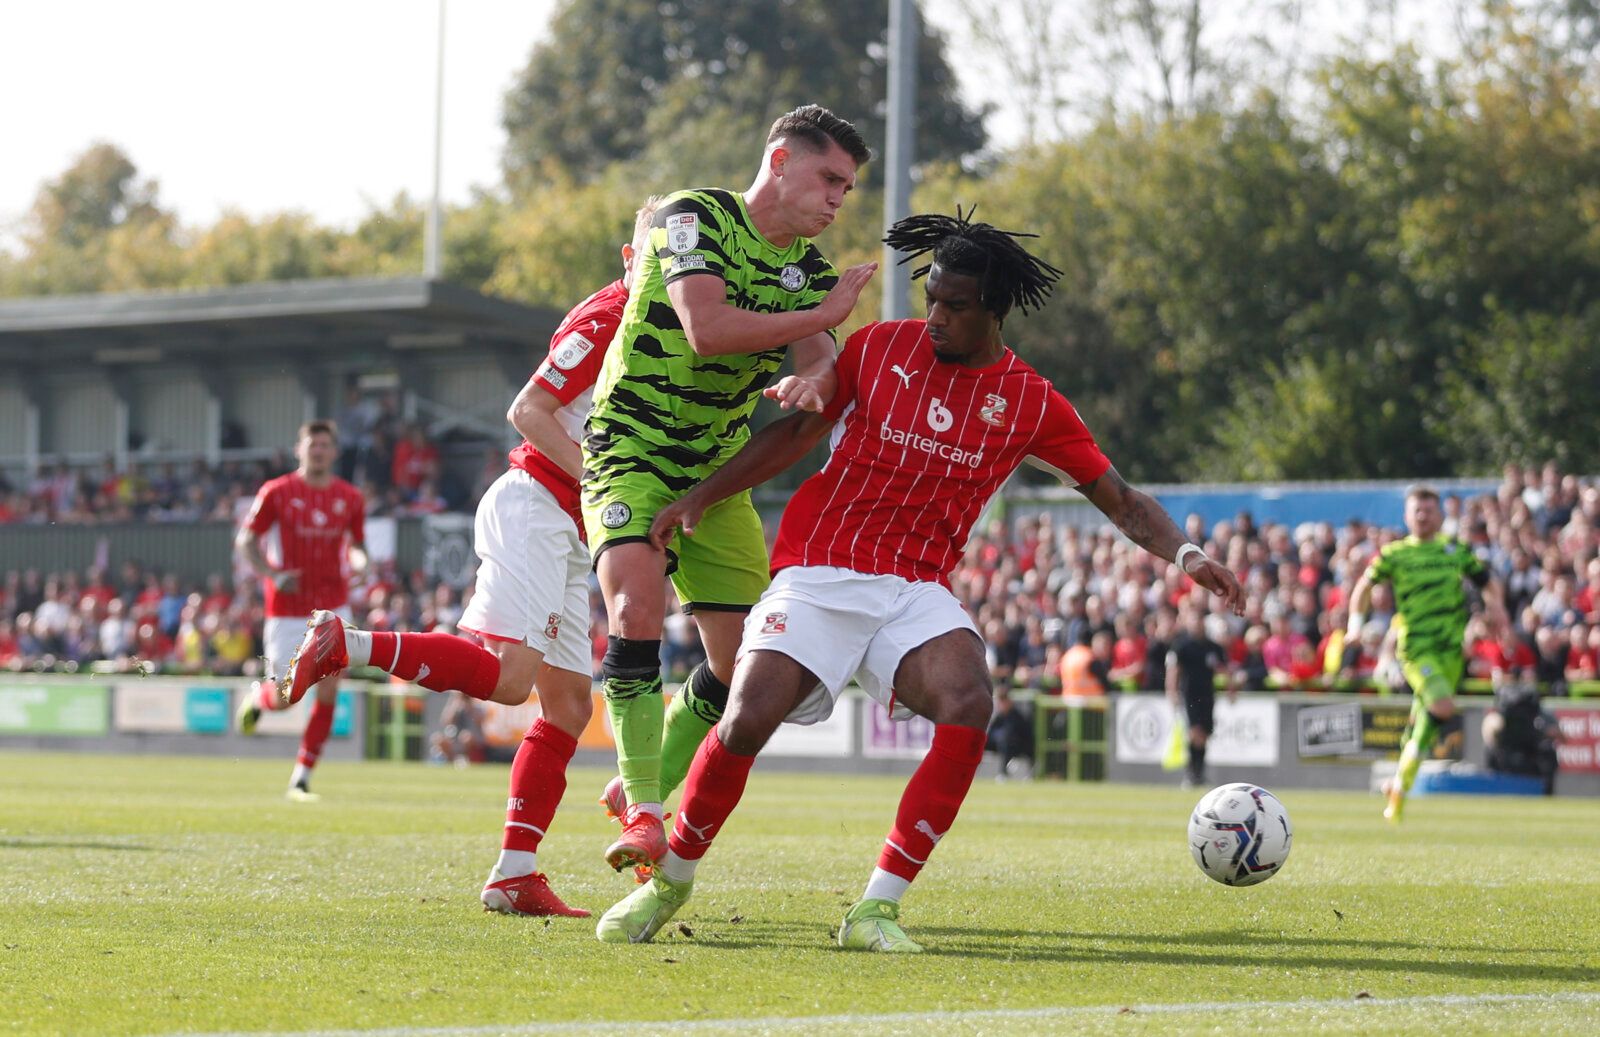 Soccer Football - League Two - Forest Green Rovers v Swindon Town - The New Lawn Stadium, Nailsworth, Britain - October 9, 2021 Forest Green Rovers’ Mathew Stevens in action with Swindon Town’s Akinwale Odimayo Action Images/Matthew Childs EDITORIAL USE ONLY. No use with unauthorized audio, video, data, fixture lists, club/league logos or 'live' services. Online in-match use limited to 75 images, no video emulation. No use in betting, games or single club /league/player publications.  Please con